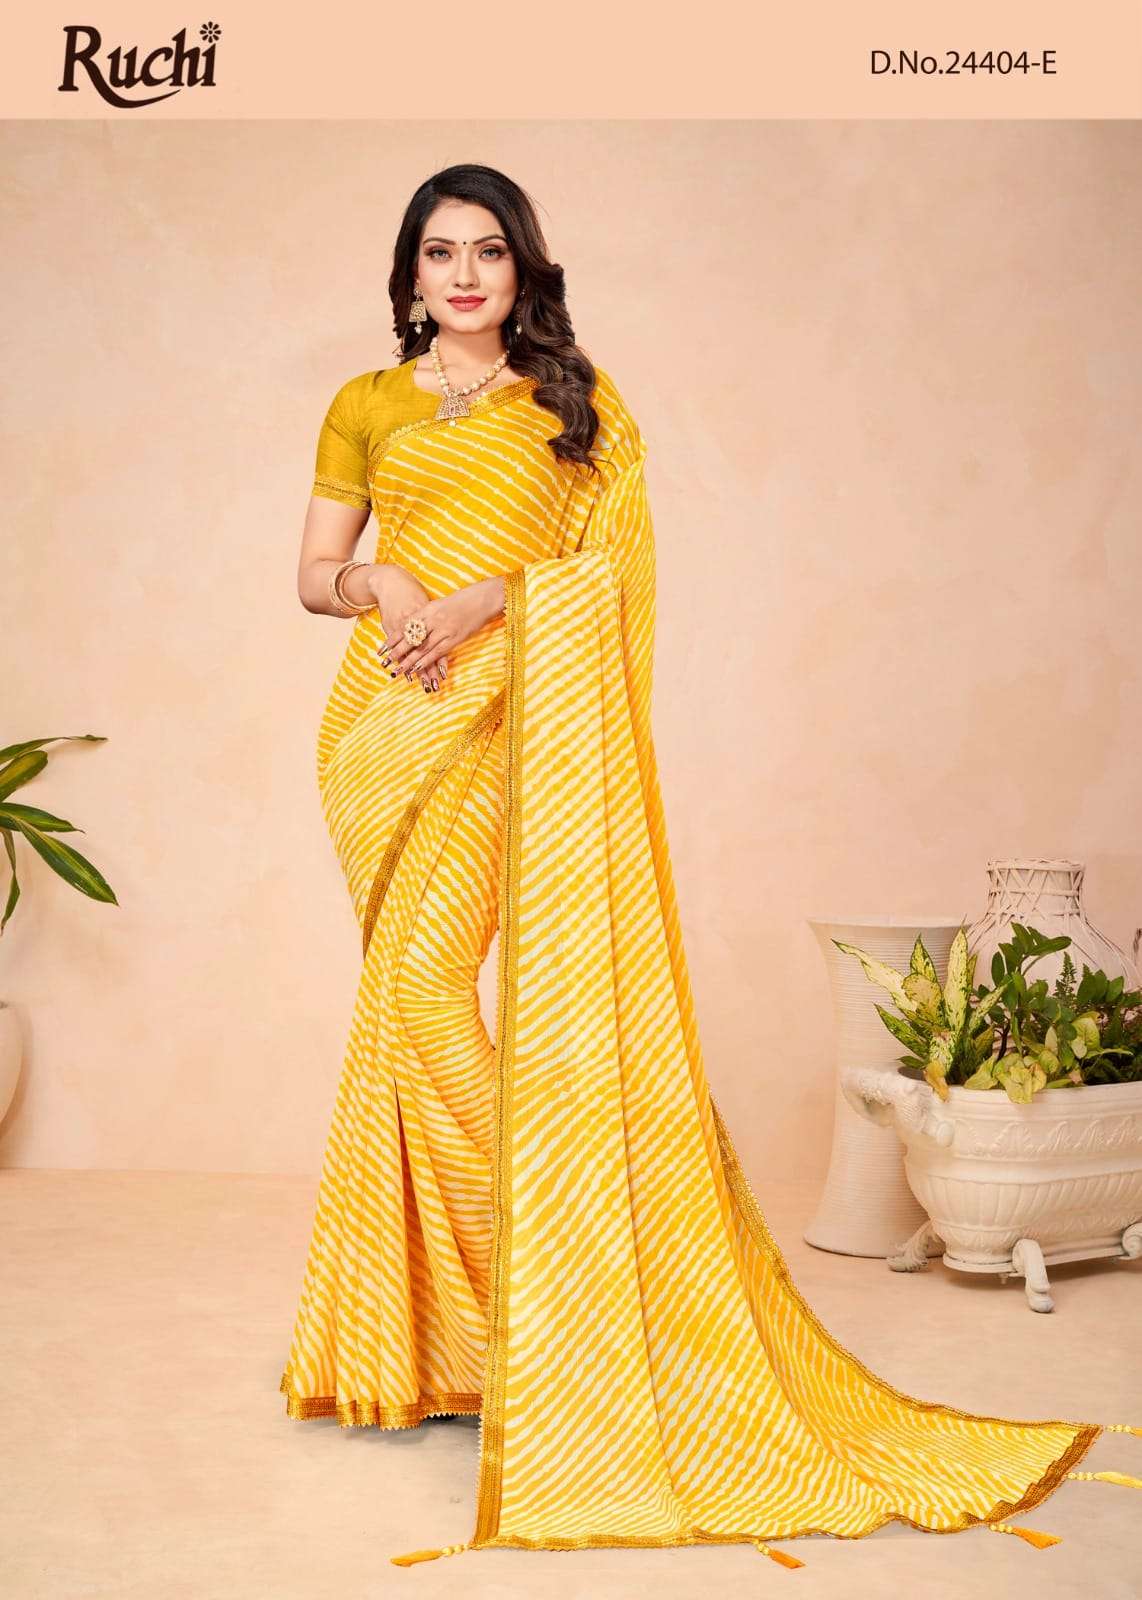 Jalpari Vol-7 By Ruchi Sarees 24404-A To 24404-F Series Indian Traditional Wear Collection Beautiful Stylish Fancy Colorful Party Wear & Occasional Wear Chiffon Sarees At Wholesale Price